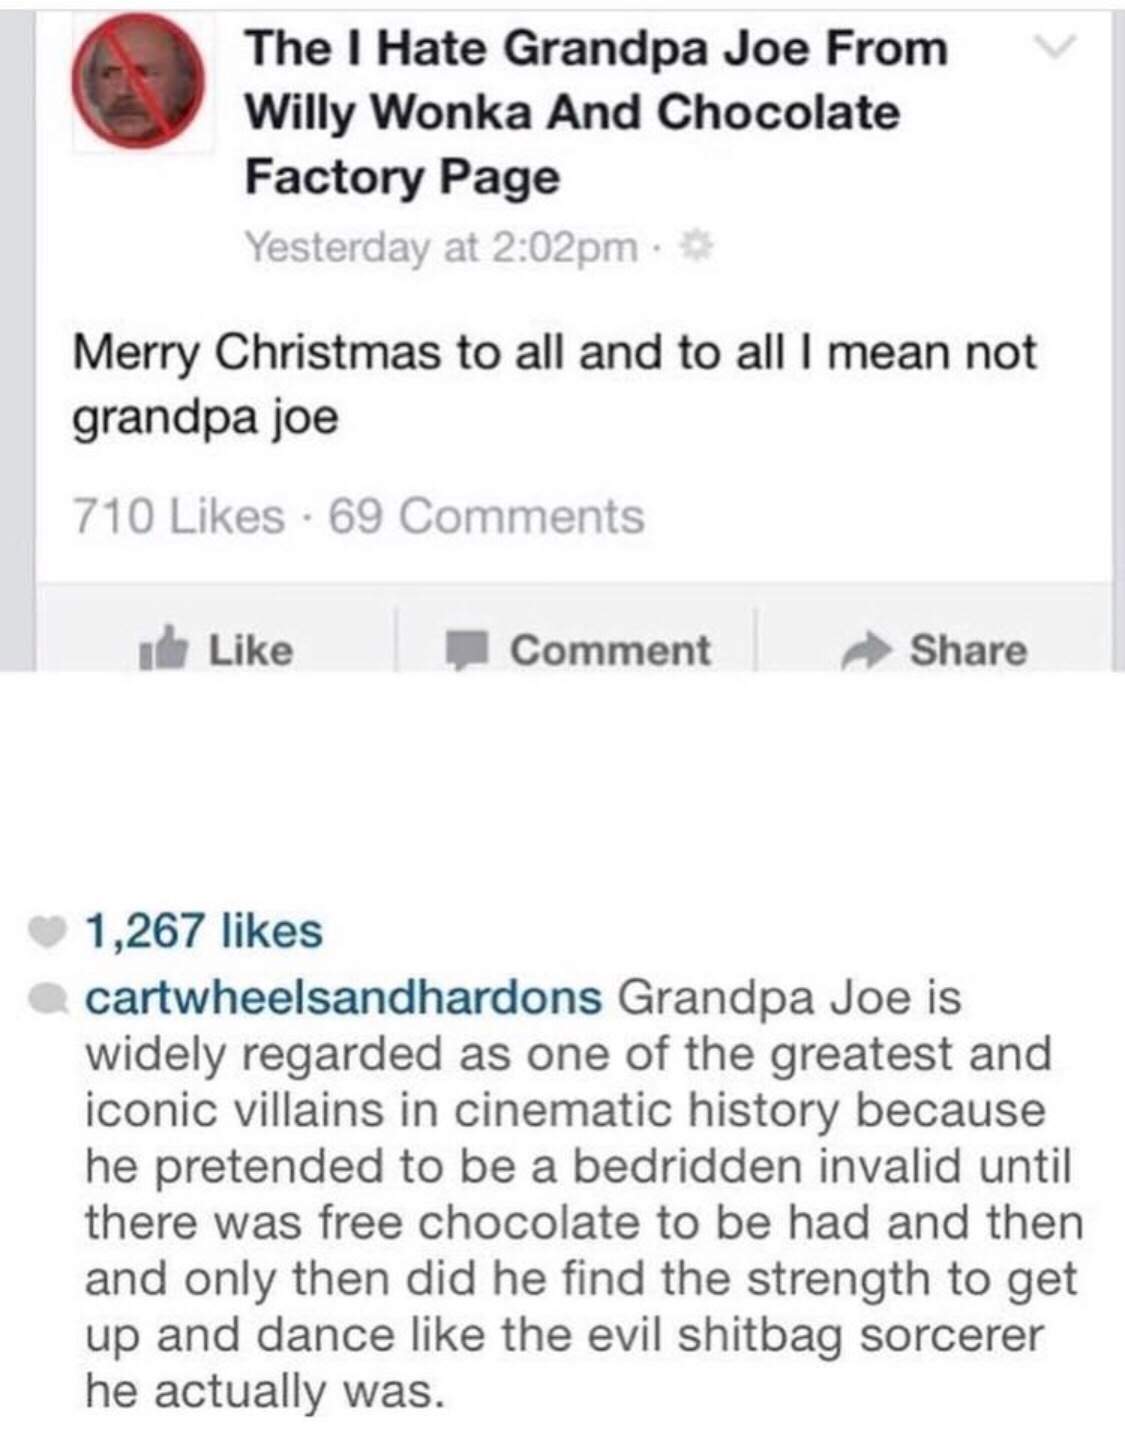 hate grandpa joe twitter - The I Hate Grandpa Joe From Willy Wonka And Chocolate Factory Page Yesterday at pm. Merry Christmas to all and to all I mean not grandpa joe 710 69 de Comment 1,267 cartwheelsandhardons Grandpa Joe is widely regarded as one of t